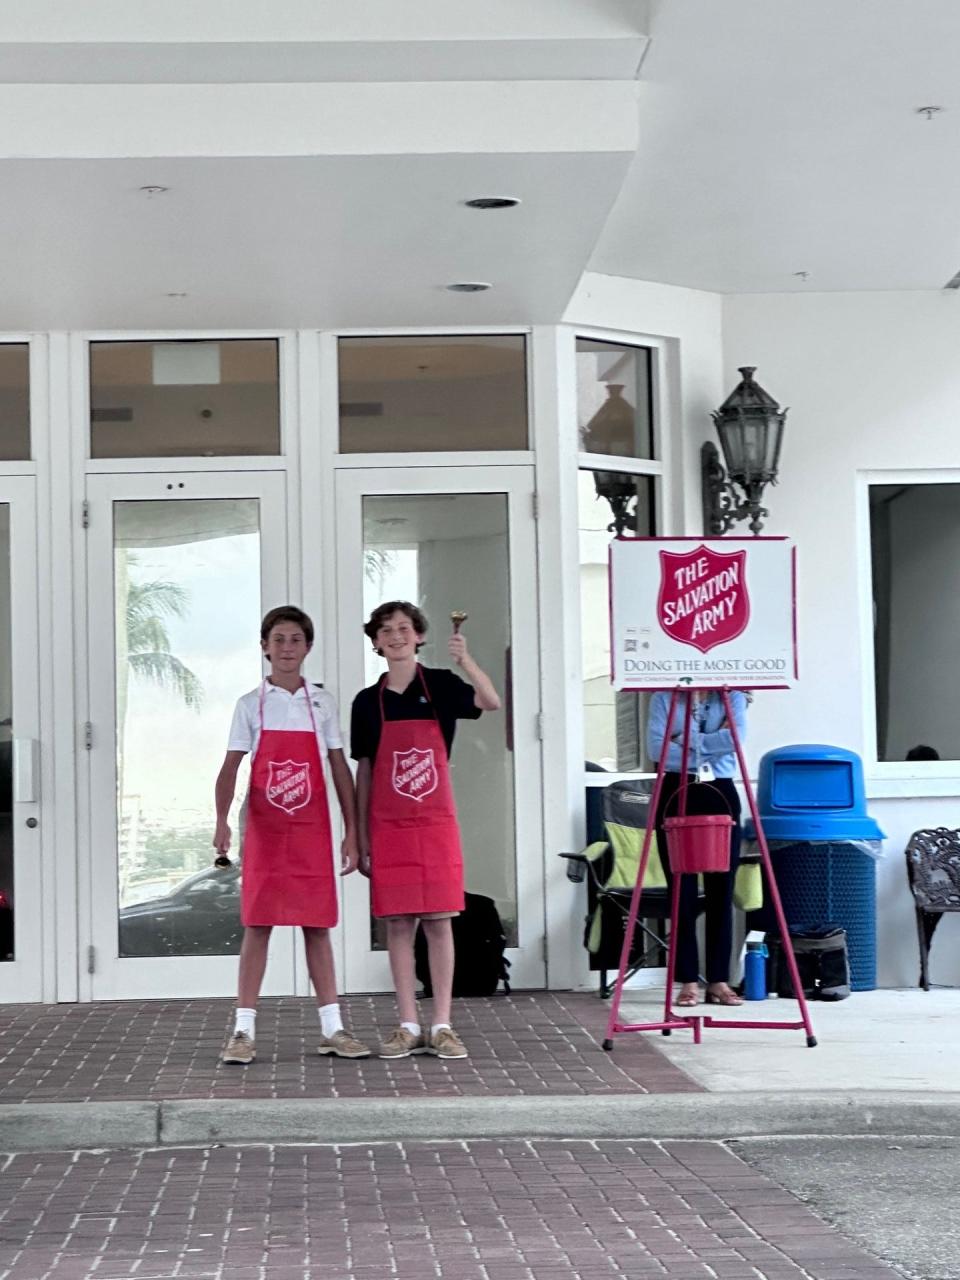 Through the Kettle Program, Rosarian Academy raised over $2,000 for the Salvation Army's social services. Kettles at the school drop off and pickup zones were often manned by students.